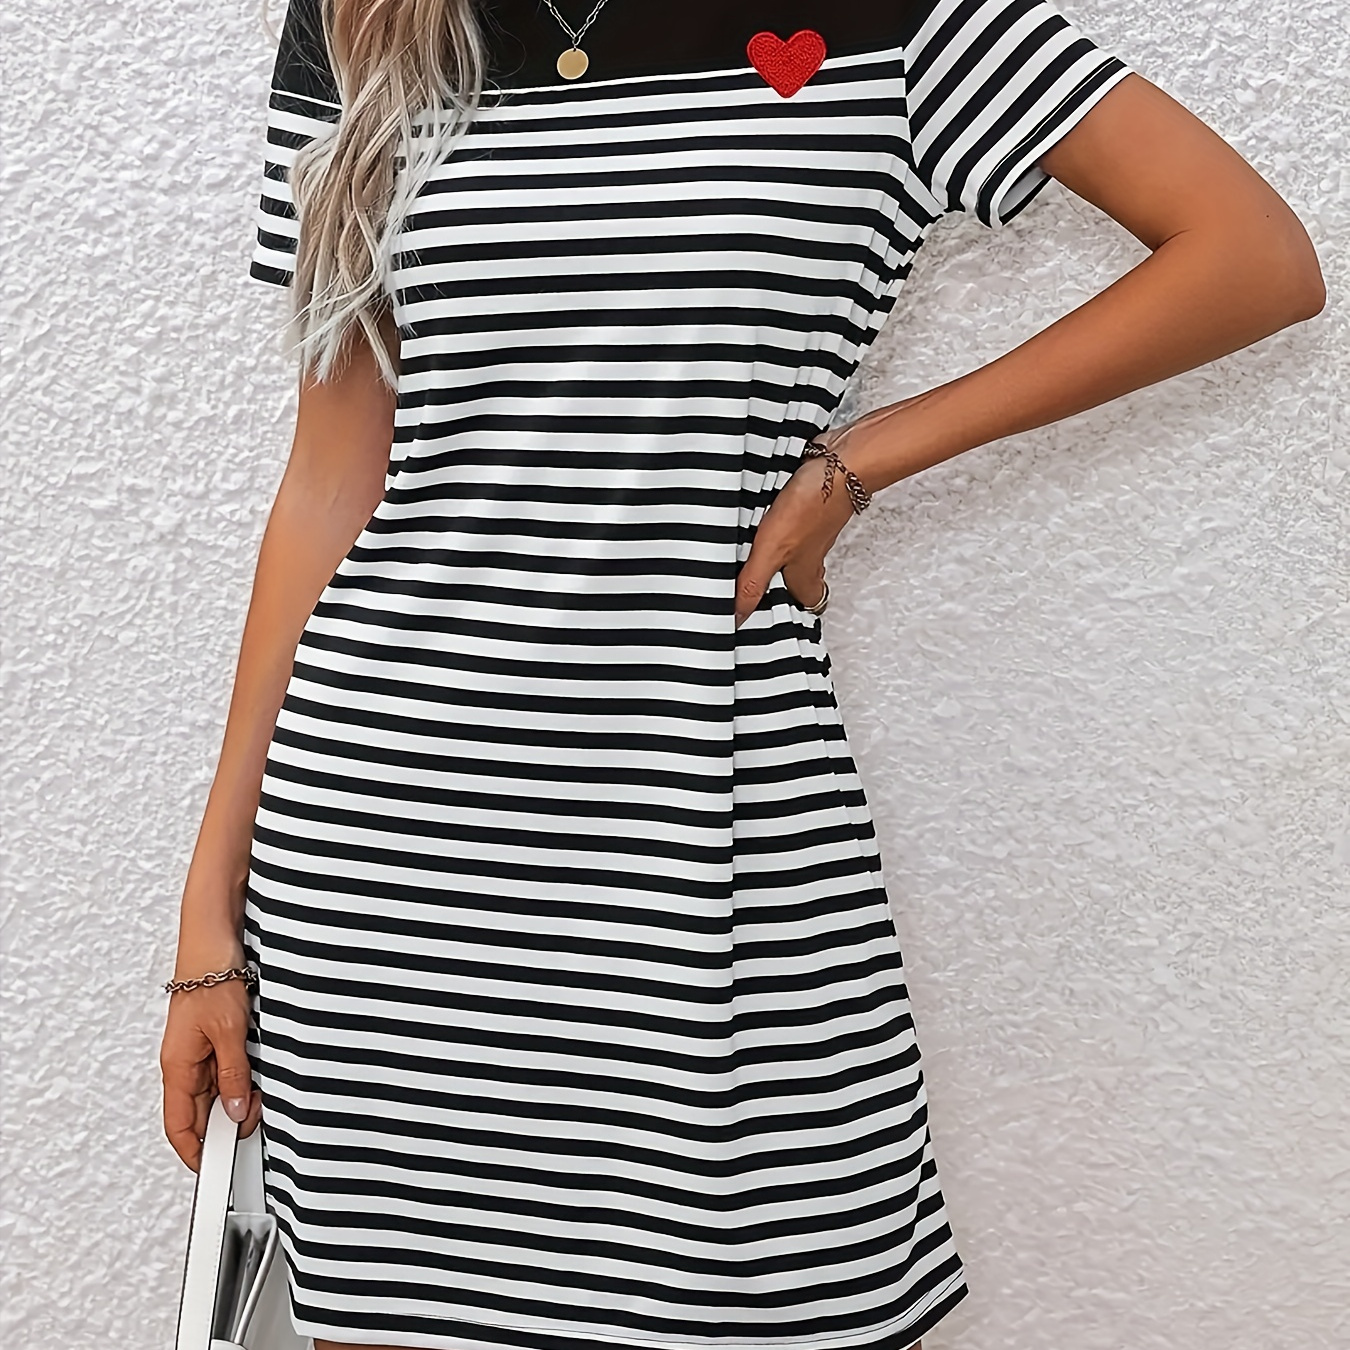 

Plus Size Heart & Stripe Print Color Block Tee Dress, Casual Short Sleeve Crew Neck Dress For Spring & Summer, Women's Plus Size Clothing